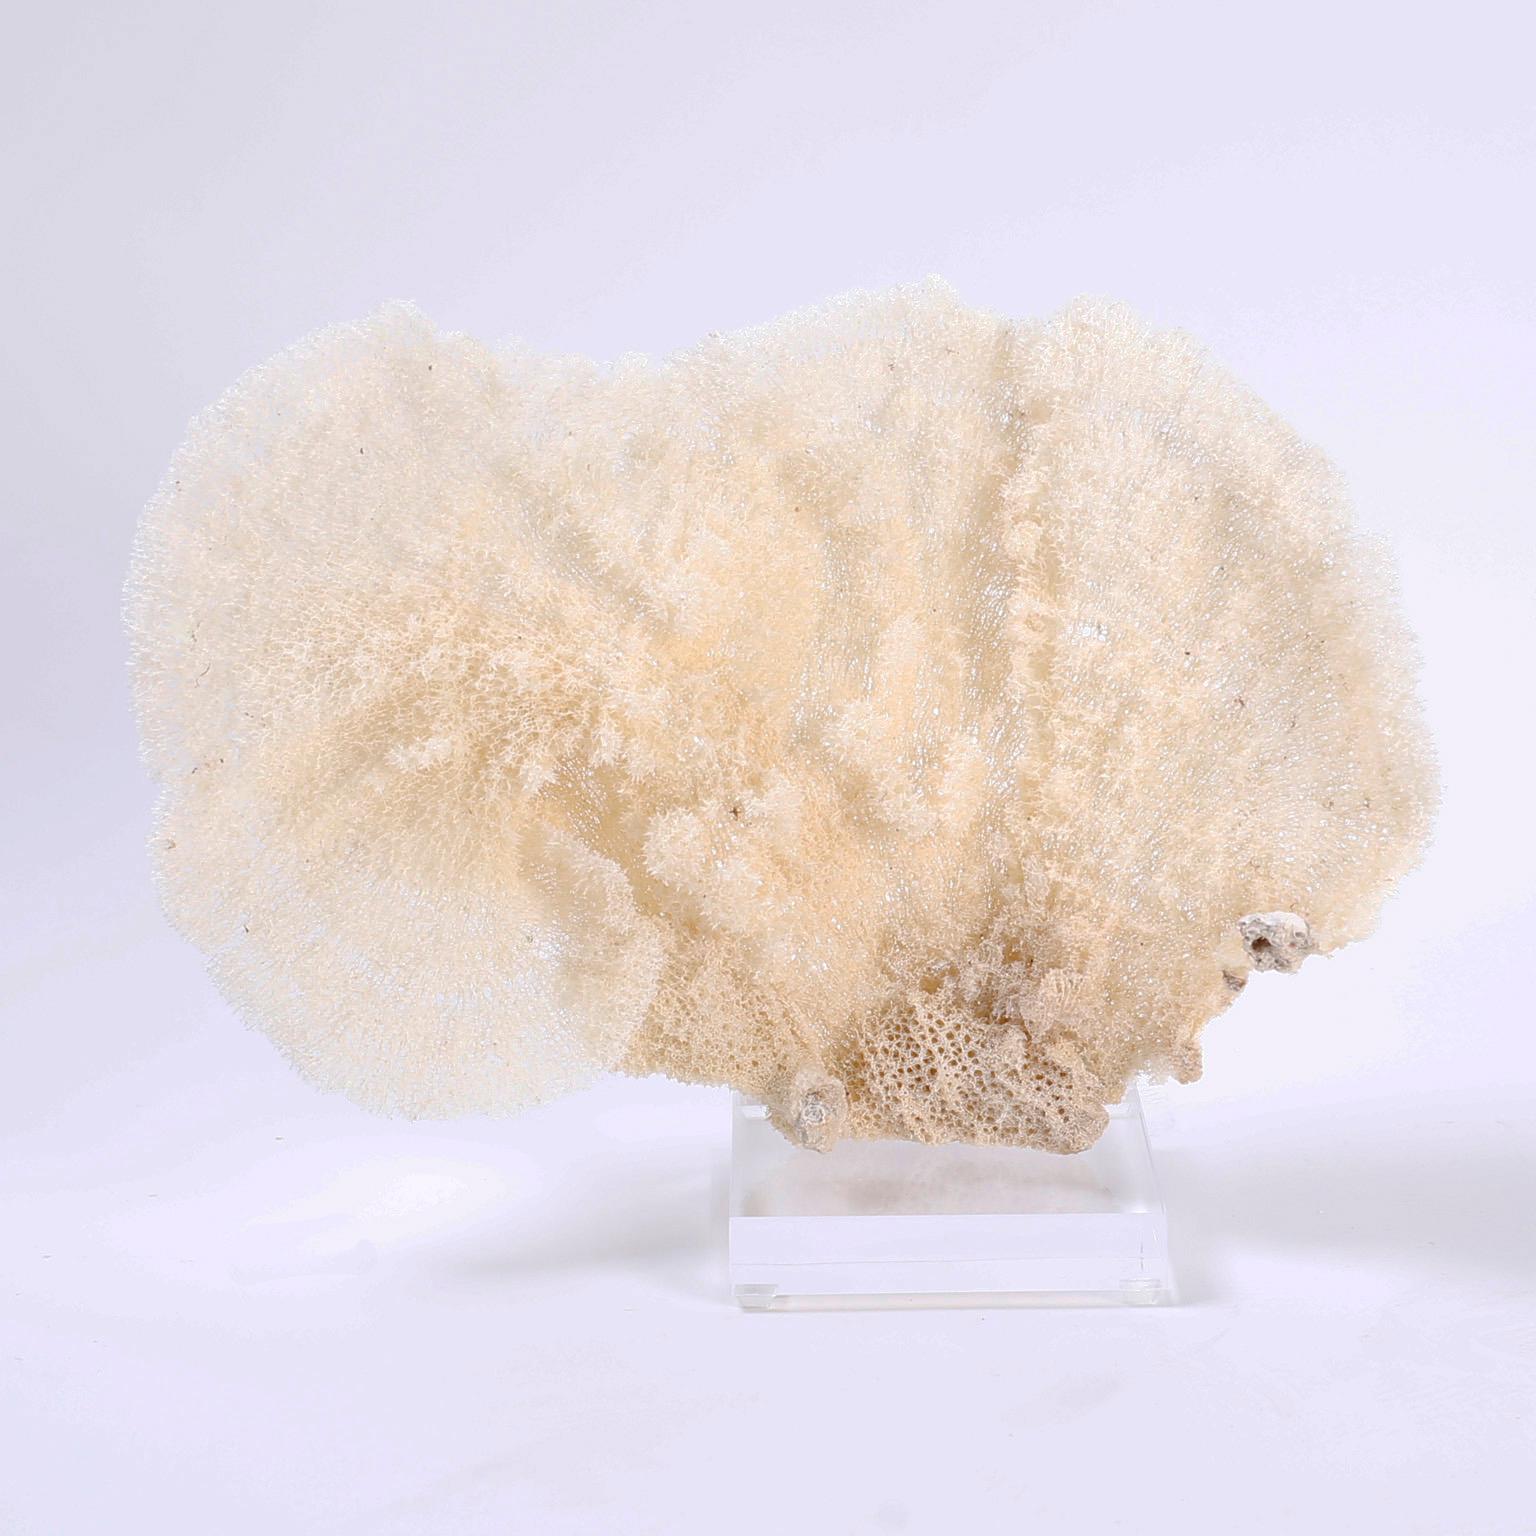 Two sea sponge specimens each with its own dramatic form, sea inspired organic textures, and subtle soothing color variations. Presented on custom Lucite stands to enhance the sculptural elements. Priced individually. 

From left to